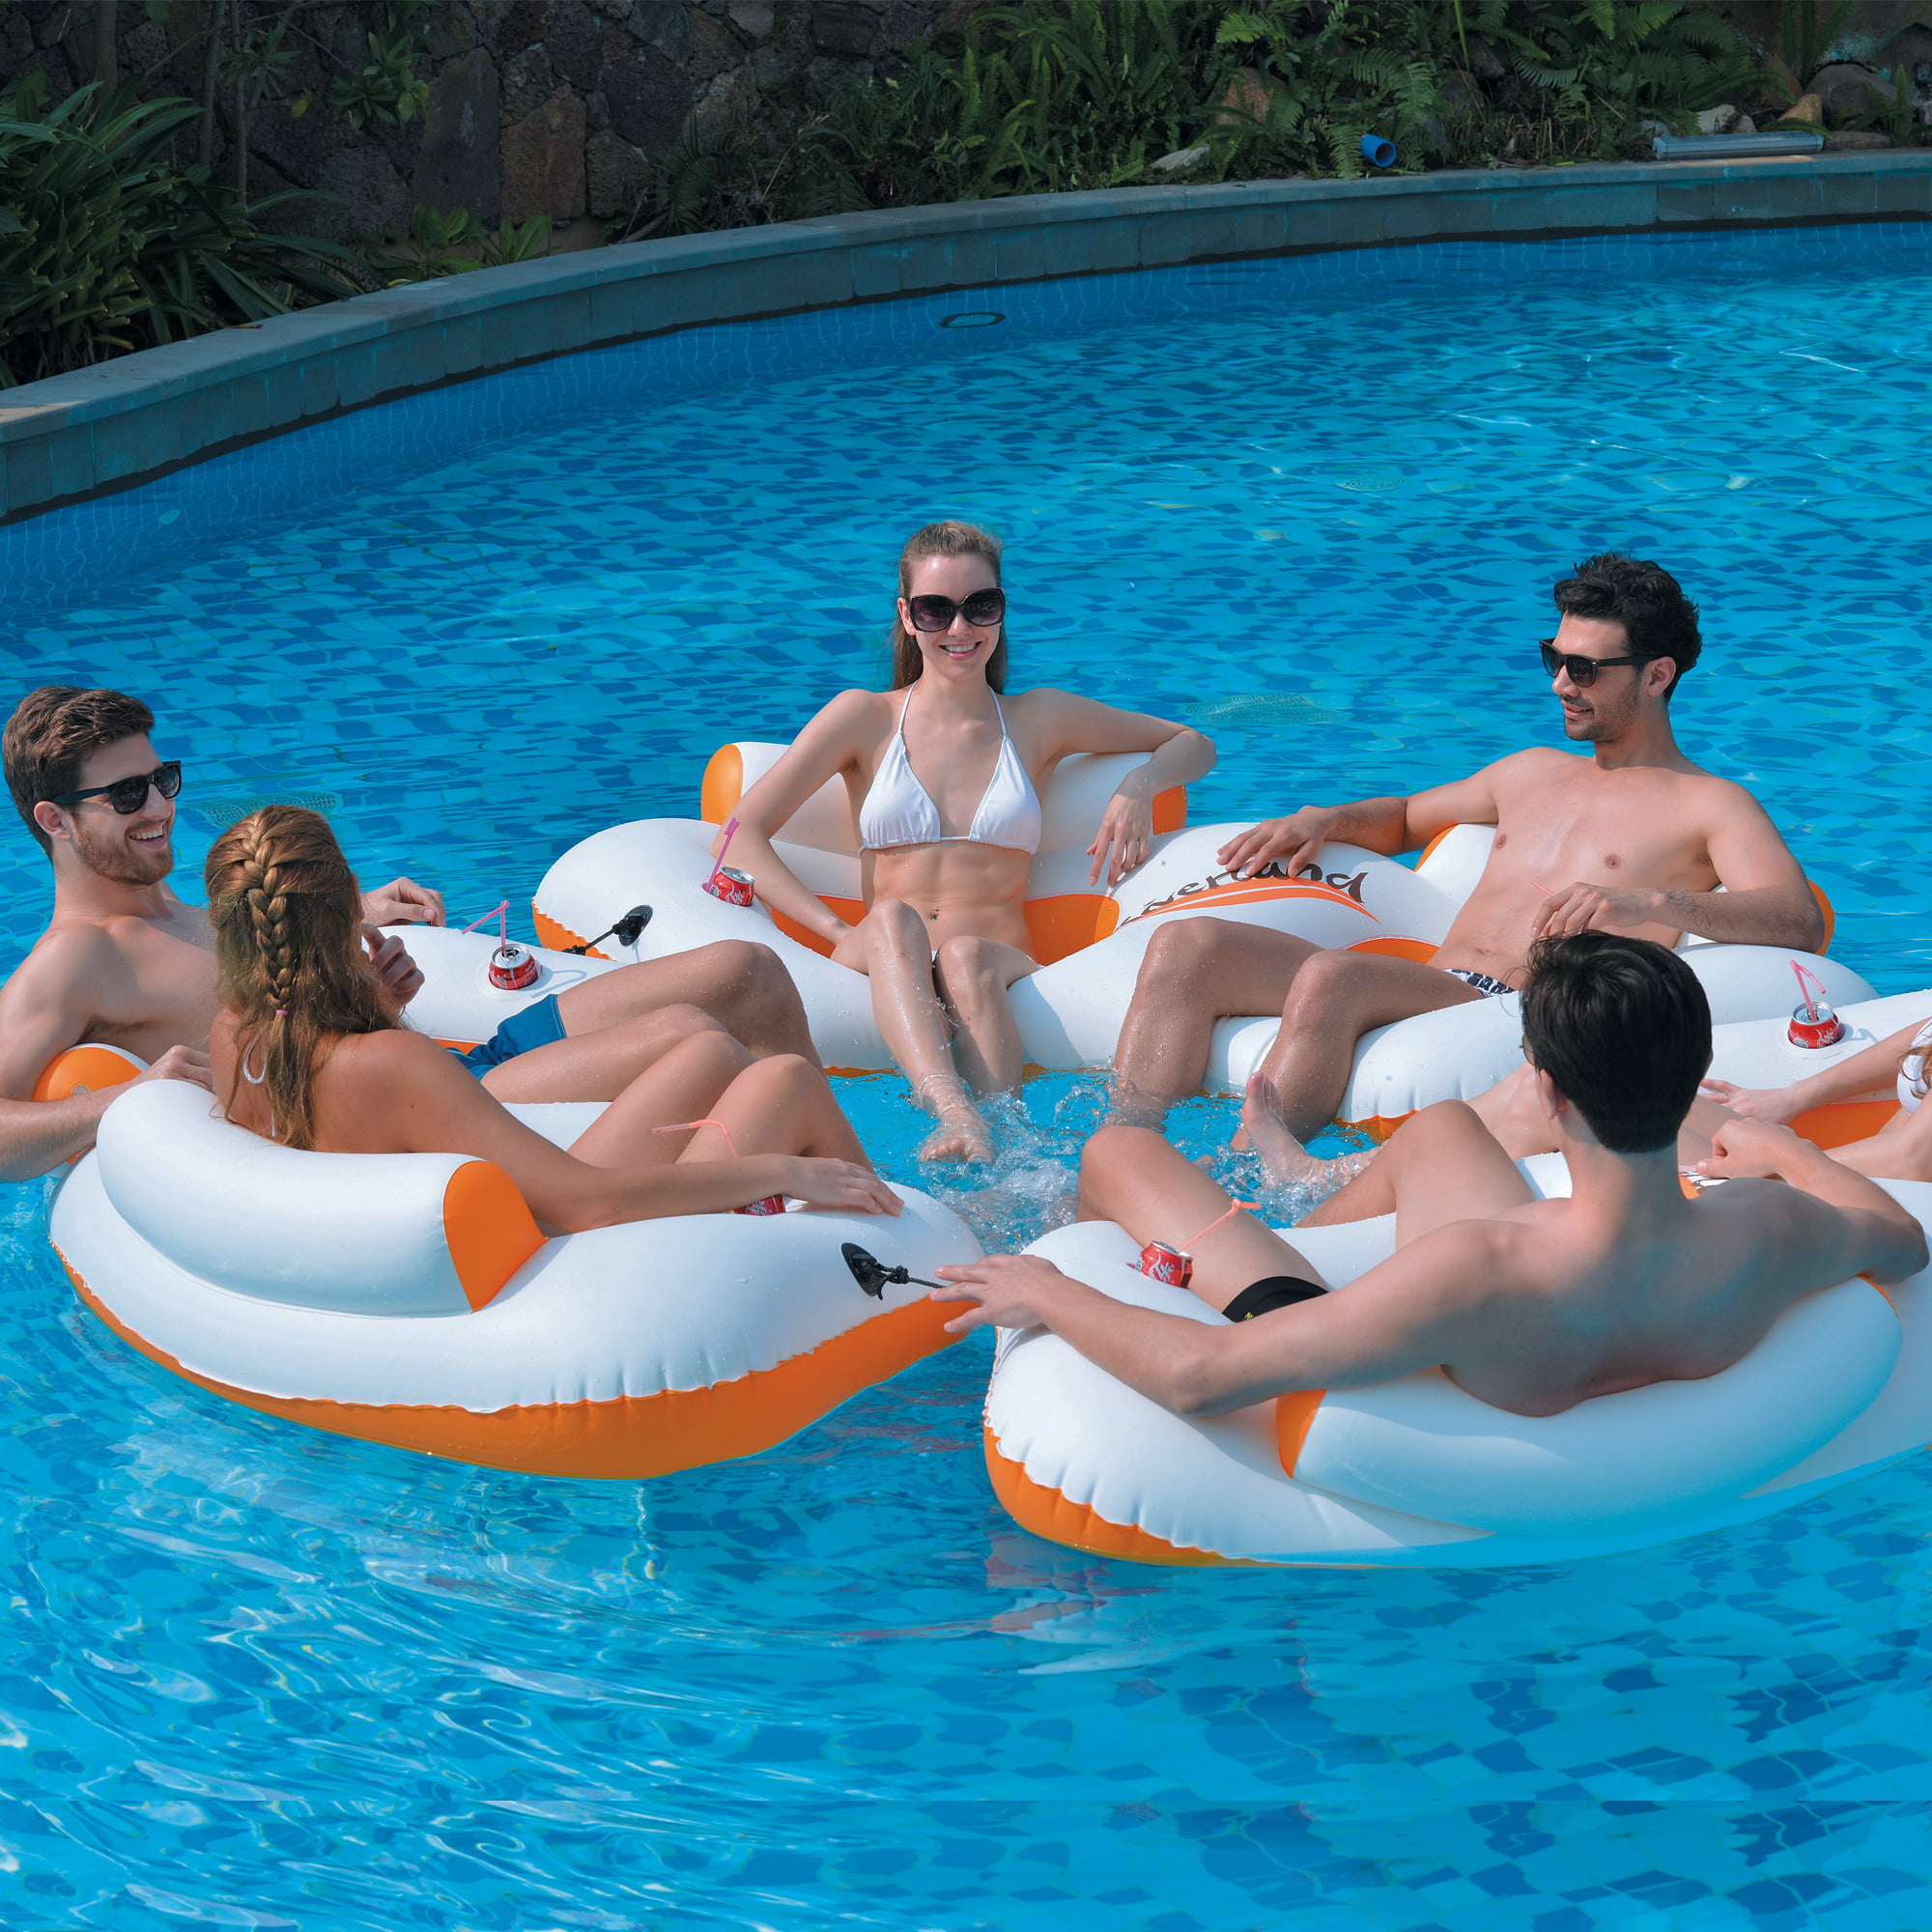 Swimline 78" Swimming Pool 4 Person Sofa Island Lounger Inflatable Float 